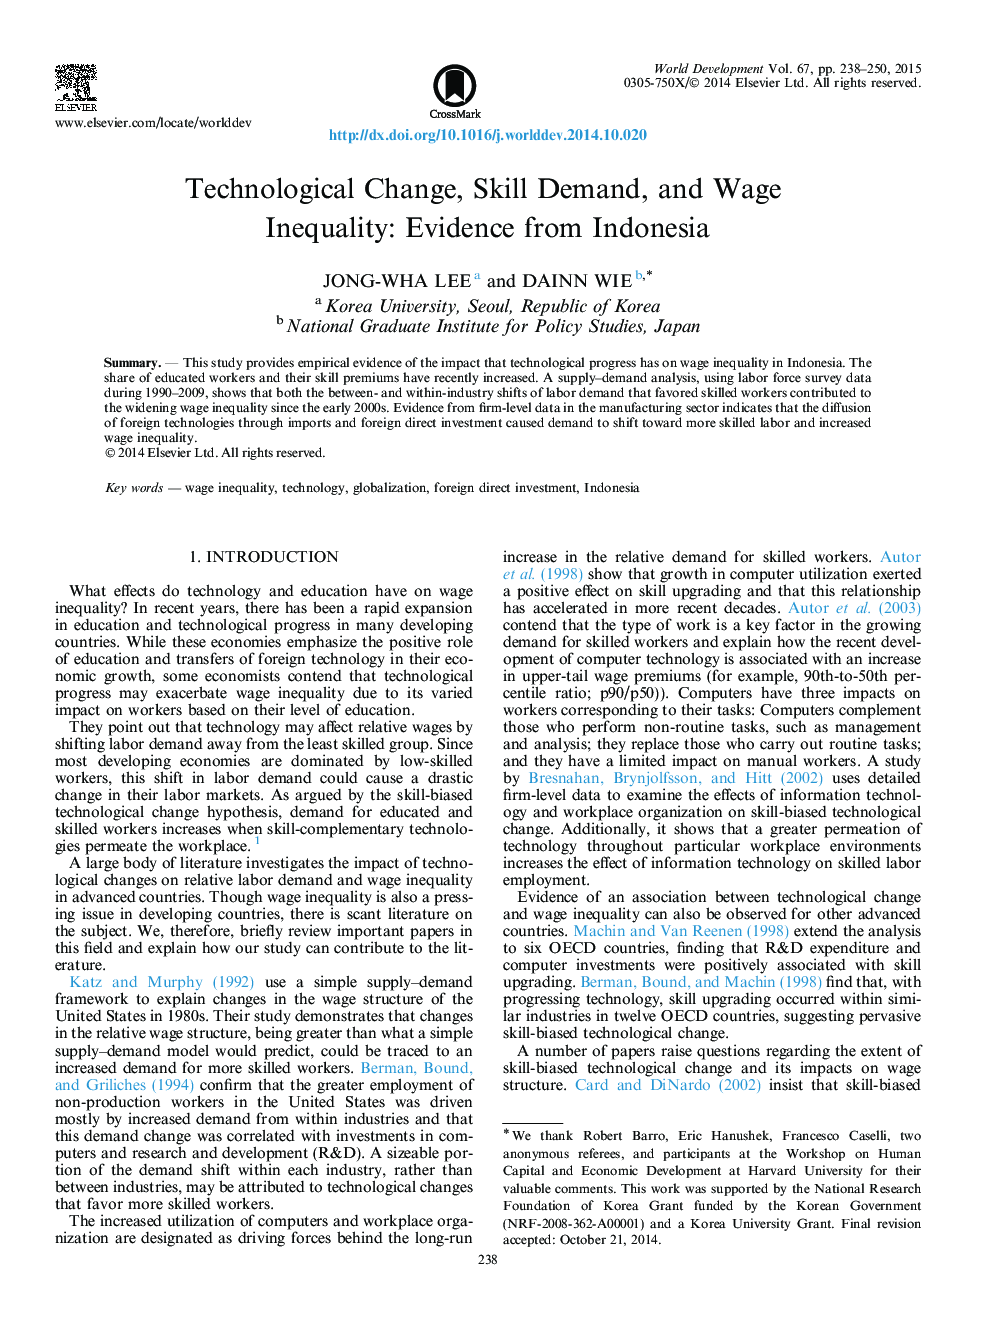 Technological Change, Skill Demand, and Wage Inequality: Evidence from Indonesia